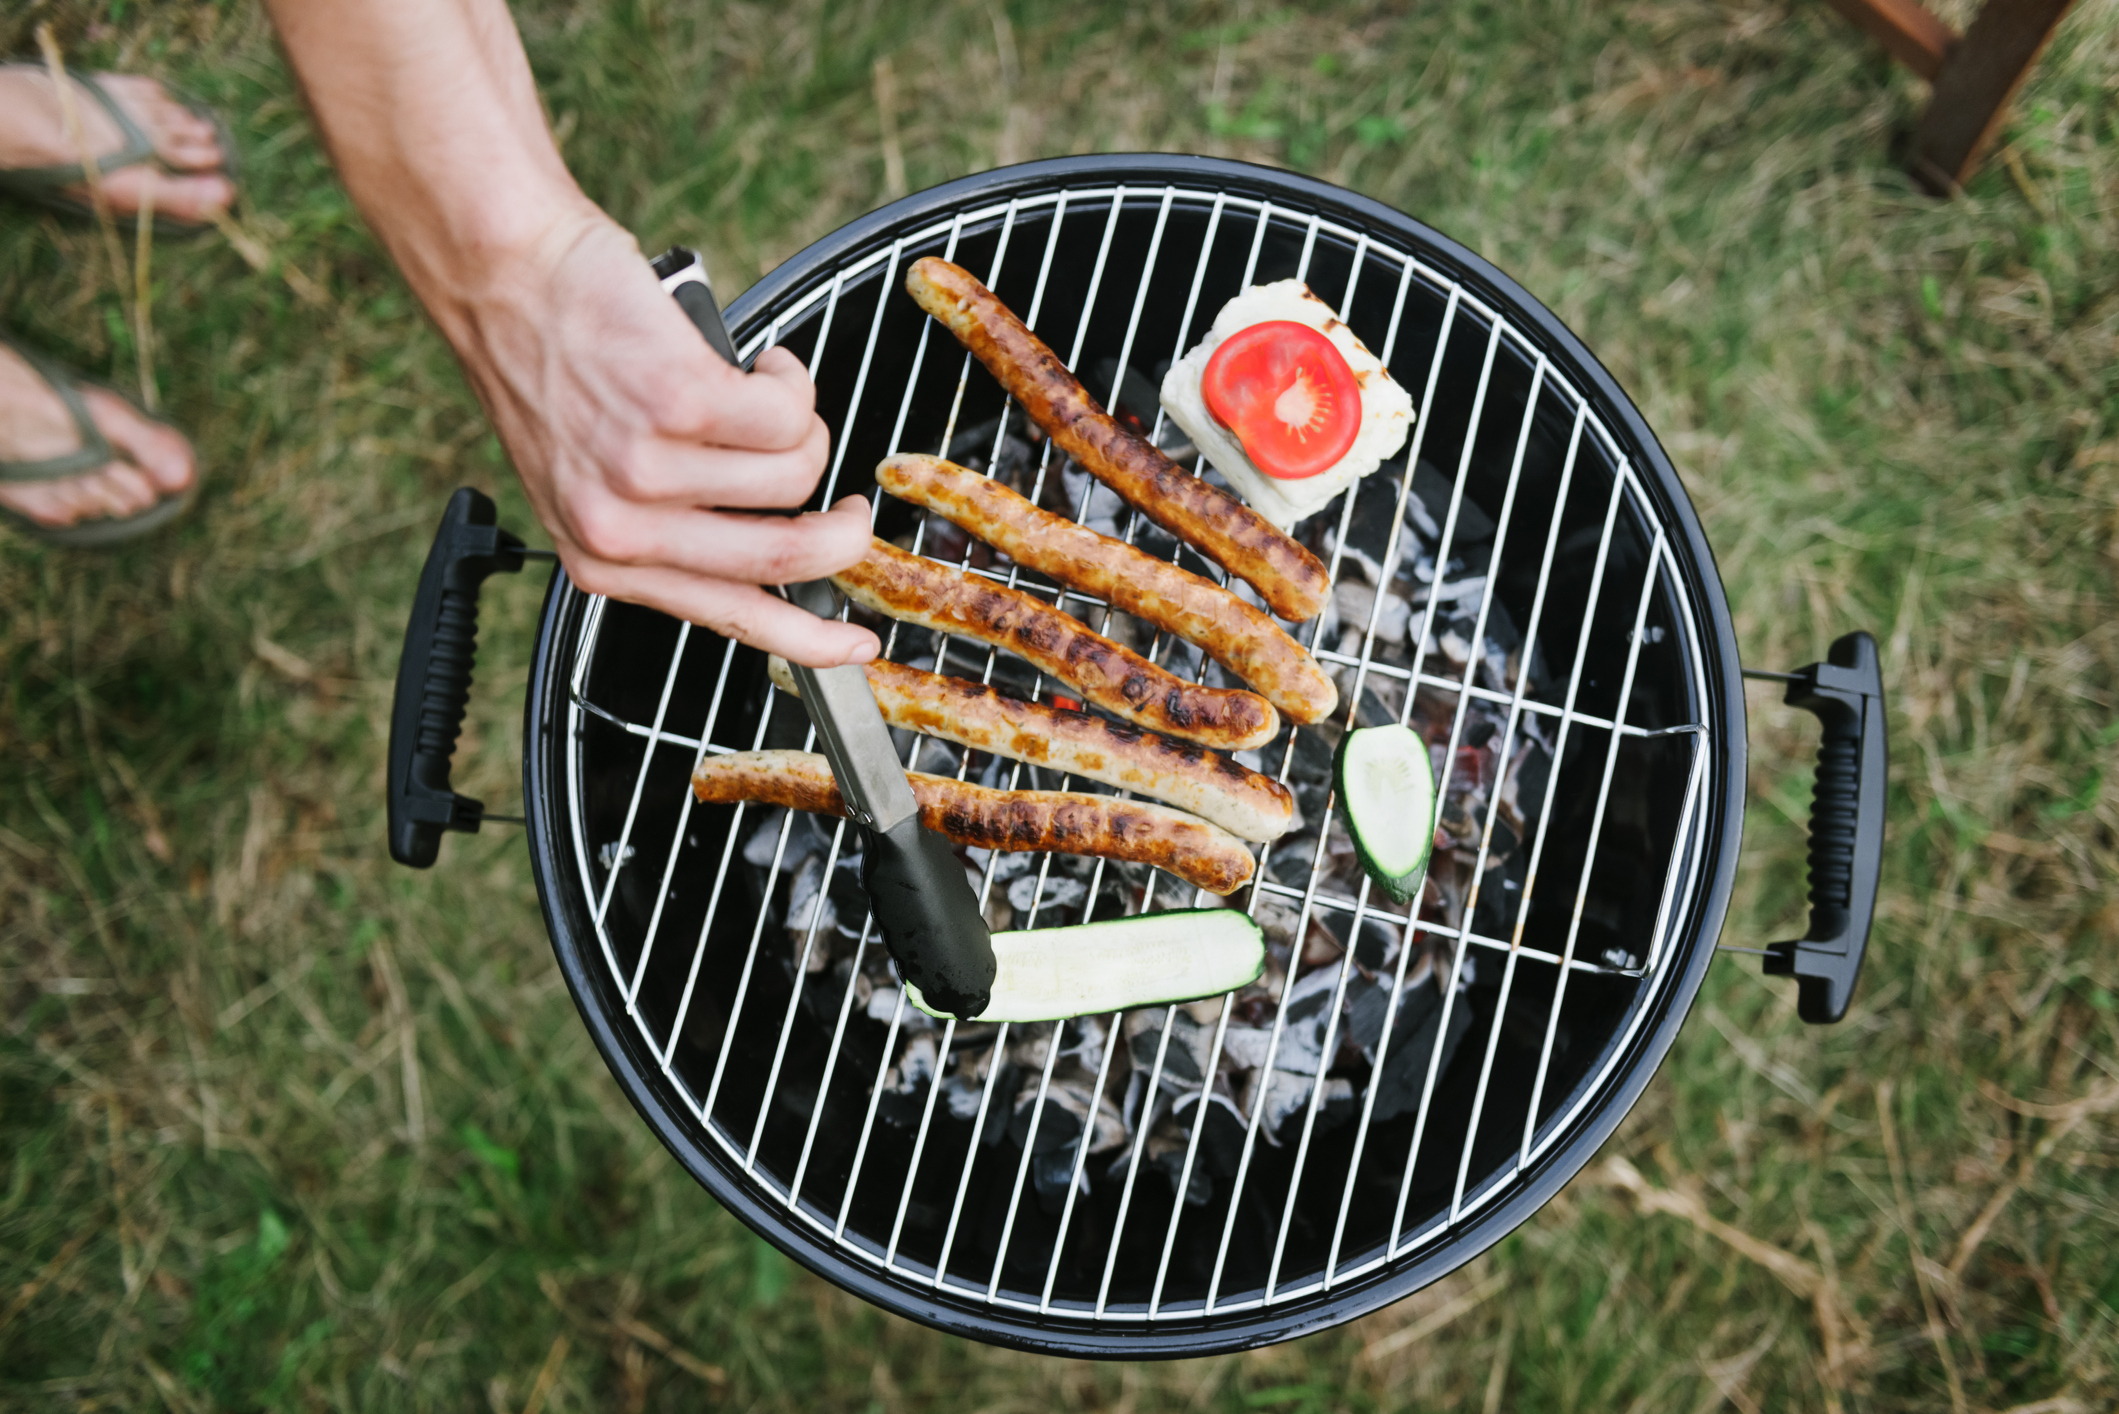 The 6 Best Grilling Accessories To Upgrade Your Barbecue Game - The Manual